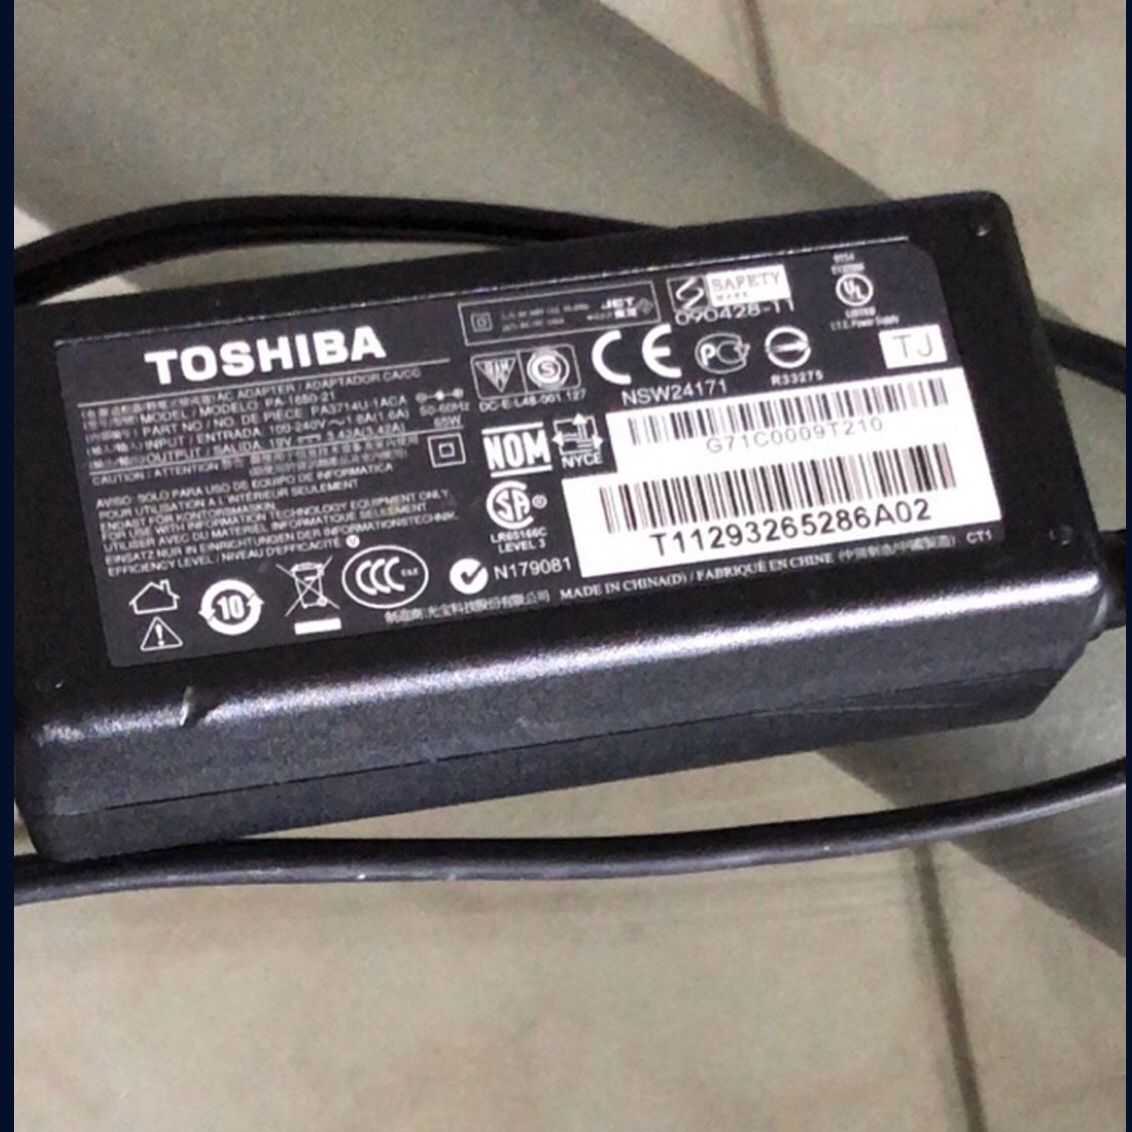 Windows 7 Laptop Charger (BACK IN STOCK) (Includes 2 Parts)